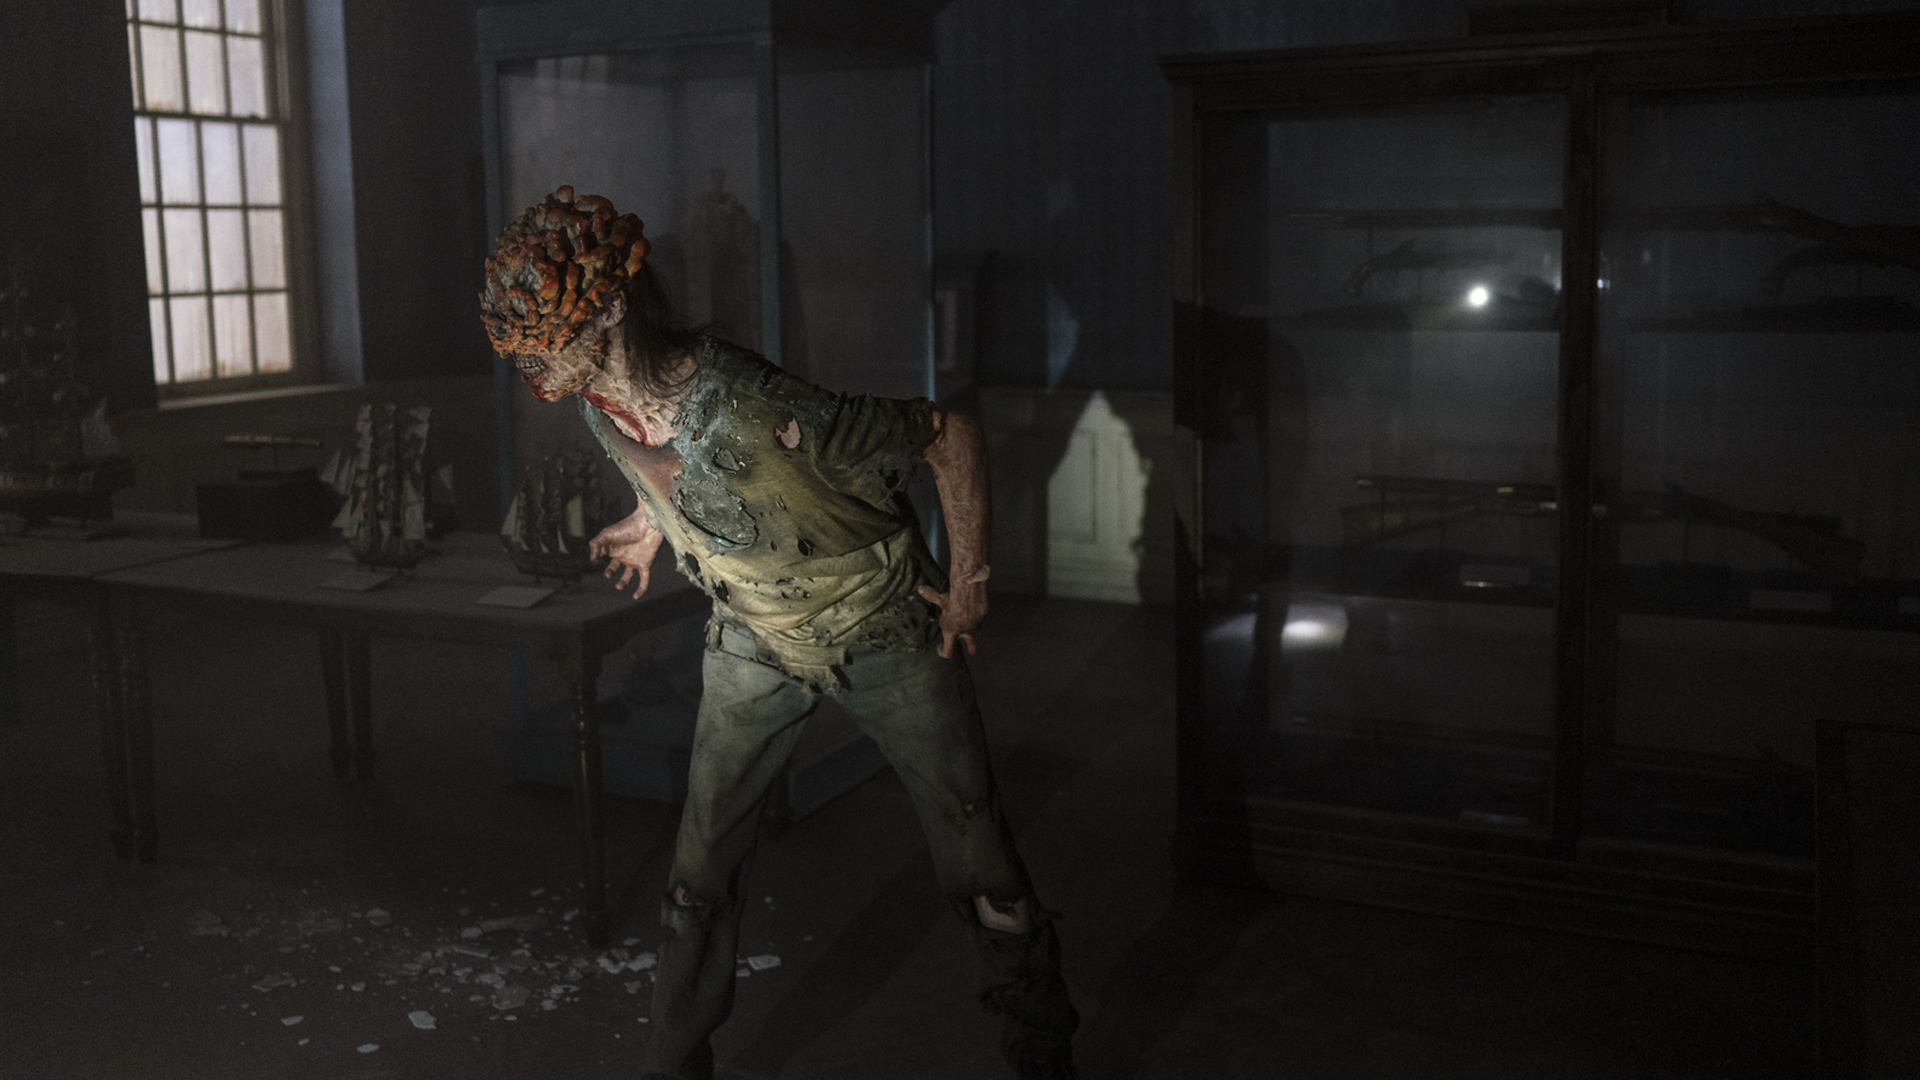 A clicker scans the room for any human hosts in The Last of Us TV show